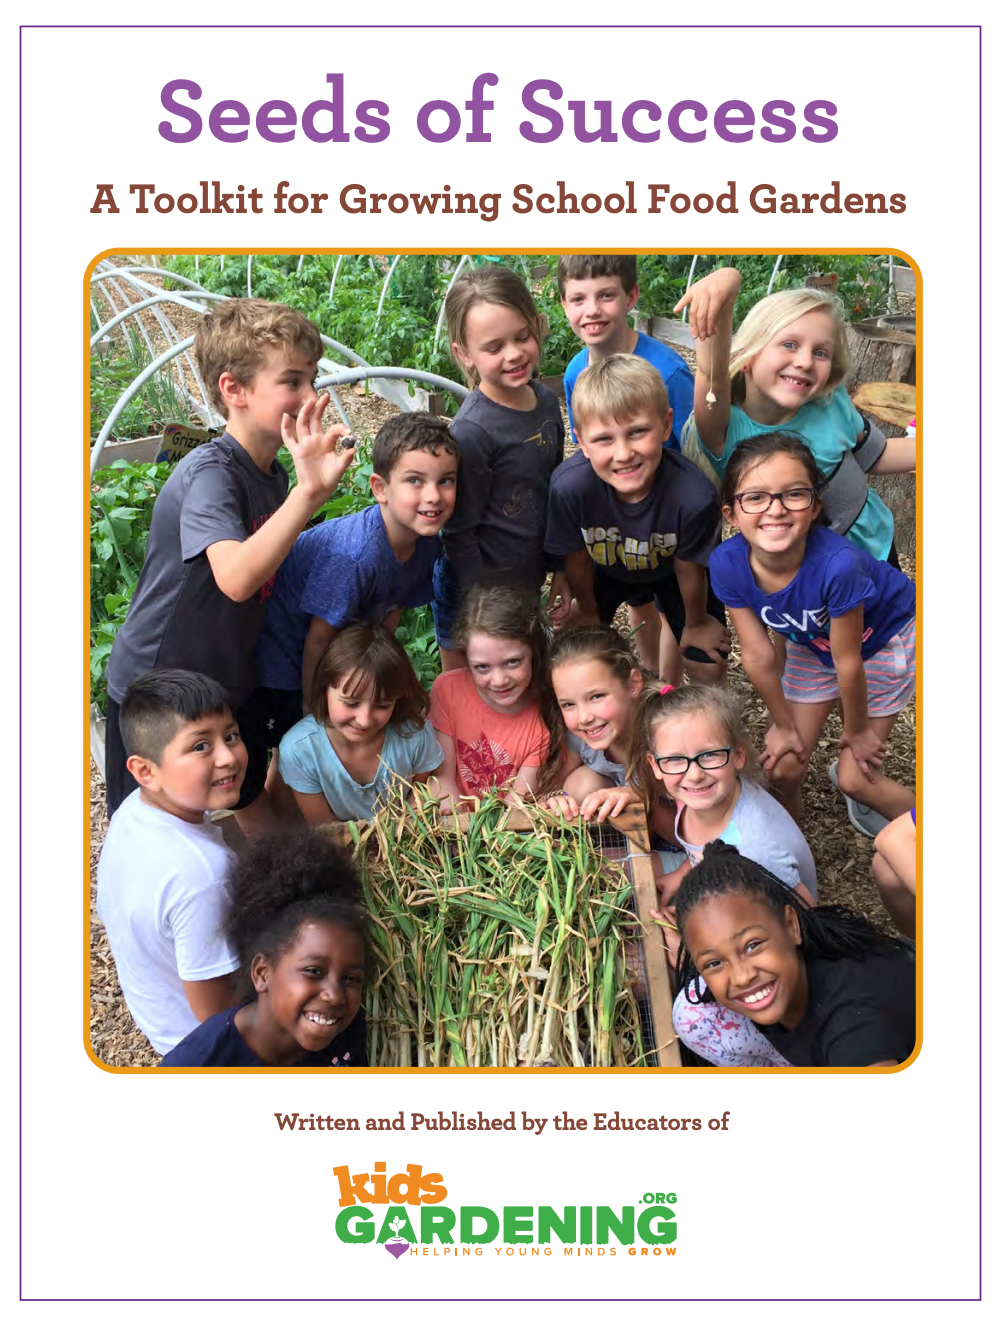 An image of the cover of the Seeds of Success Toolkit